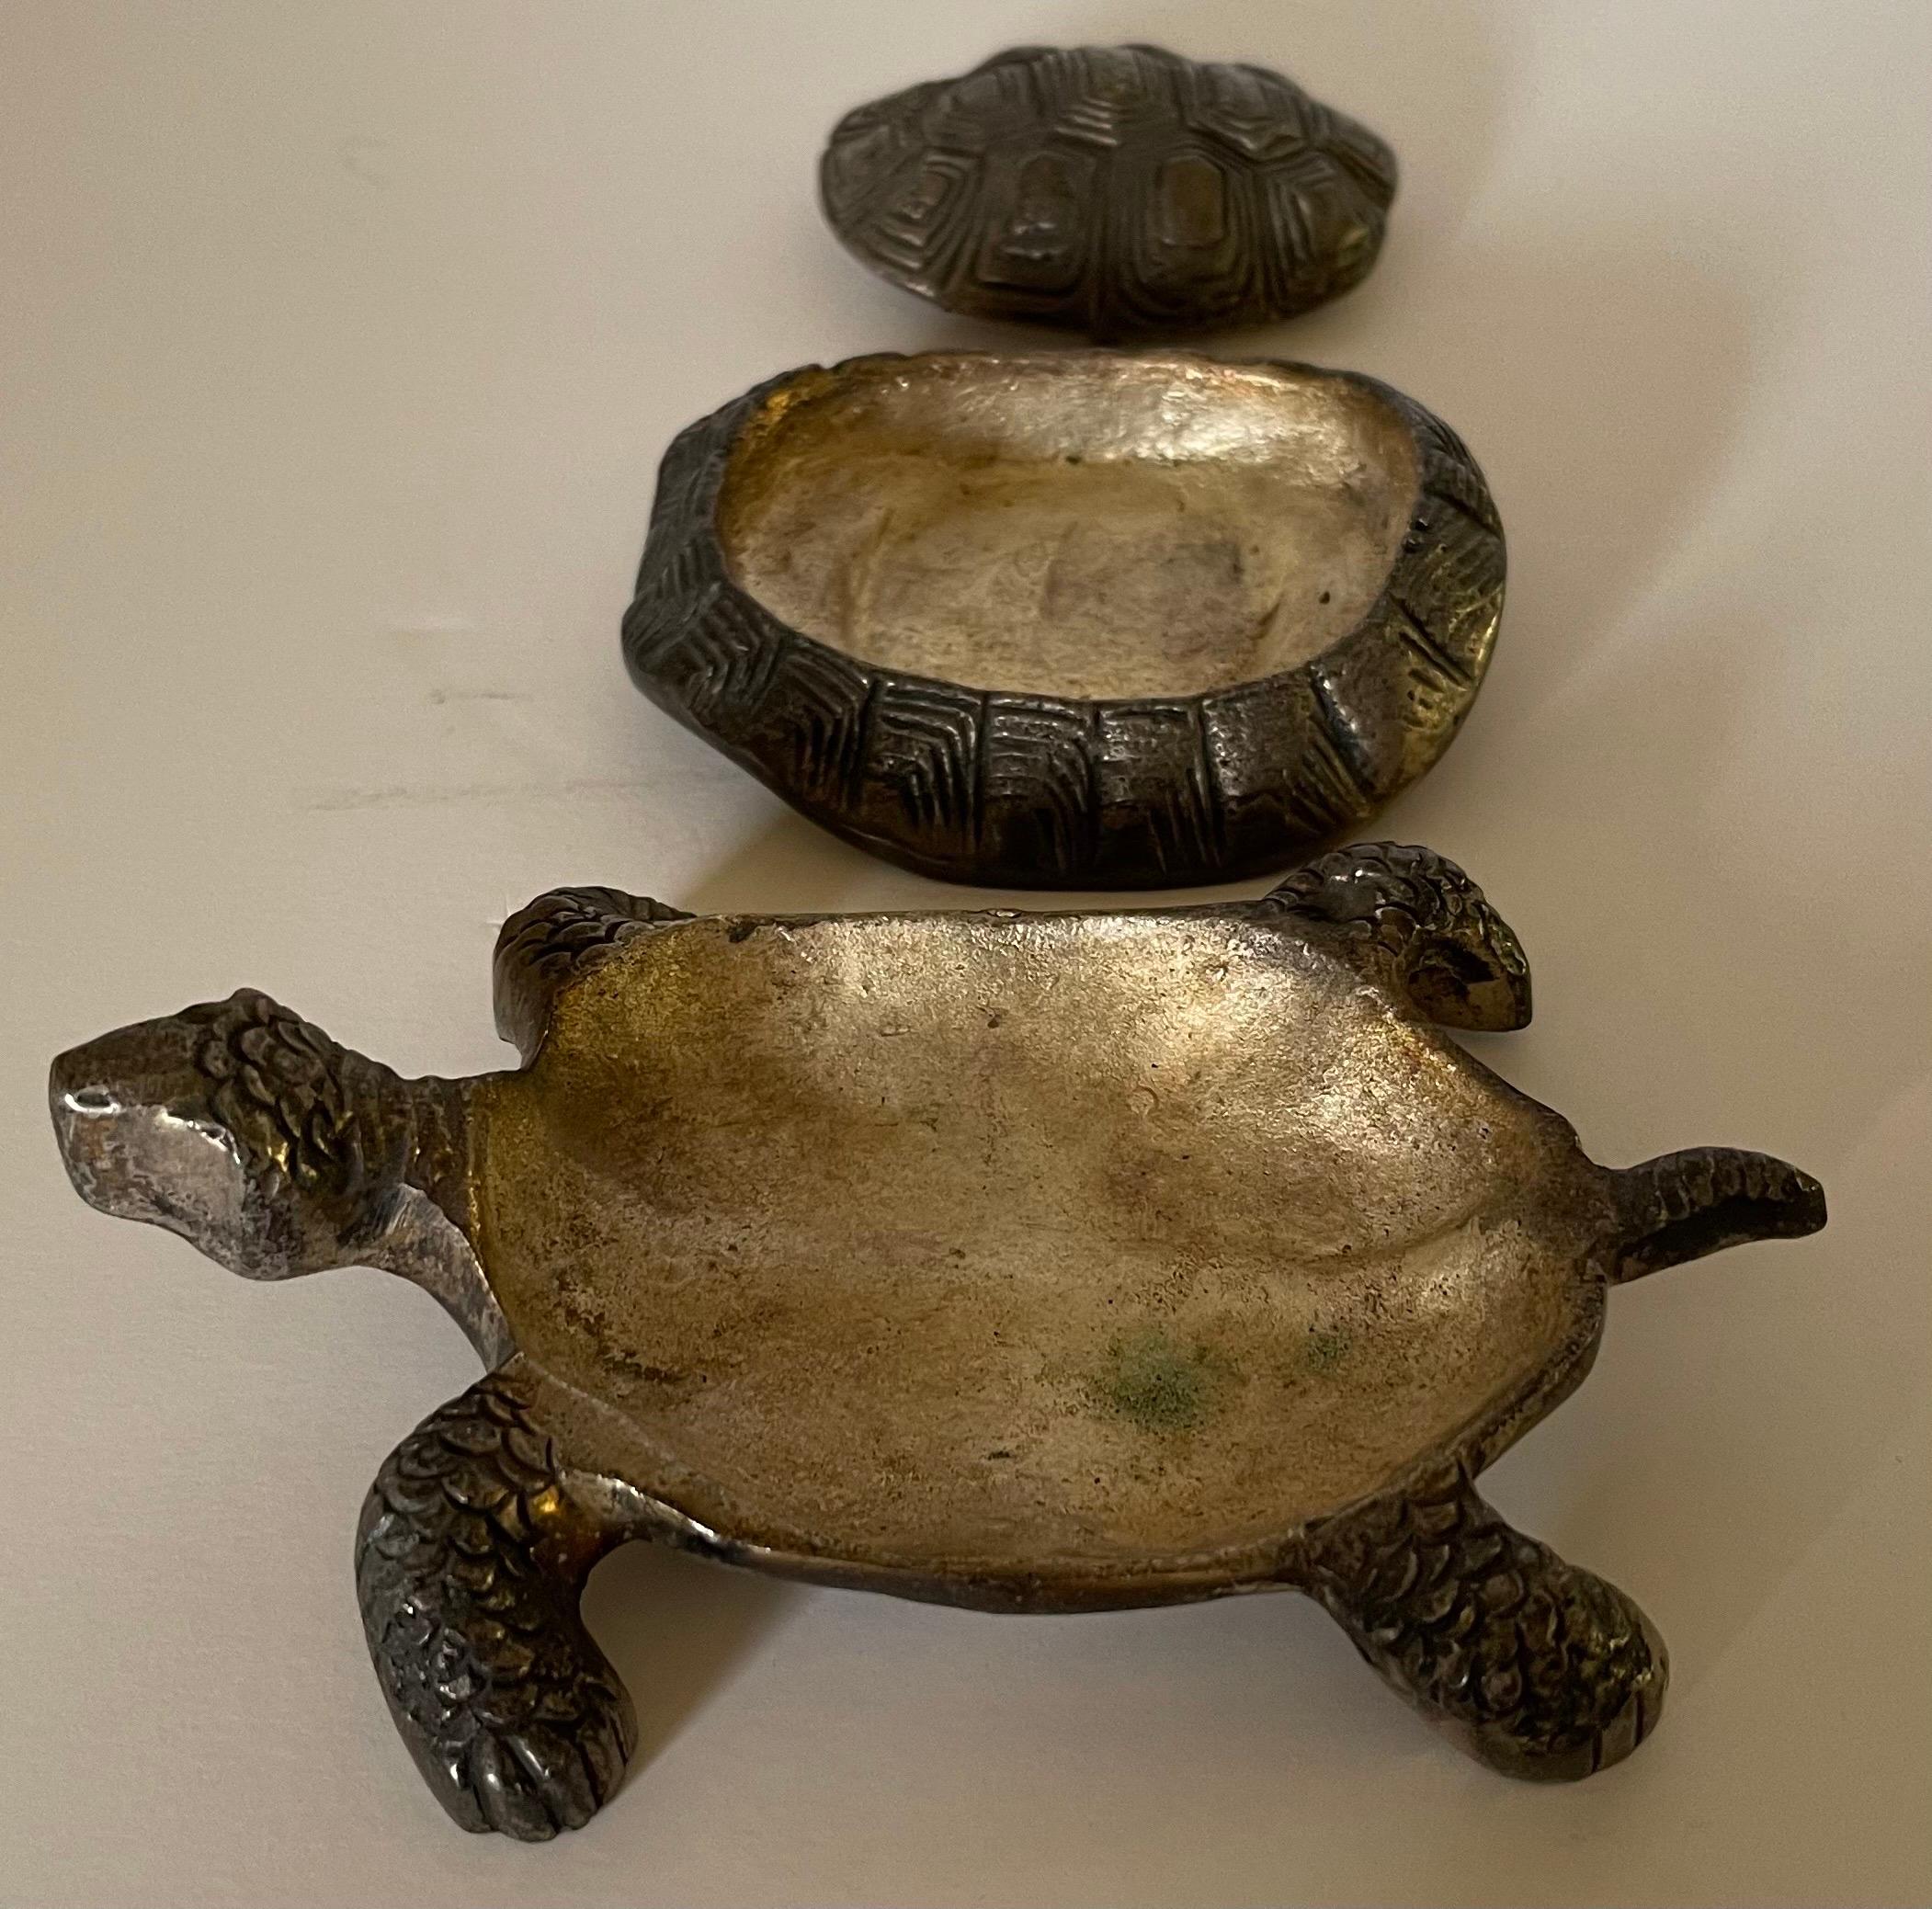 Mid century heavy brass turtle box. Three tiered shell with small storage compartments. Box is heavy and well made. Remnants of makers mark/ brand tag on the underside. 